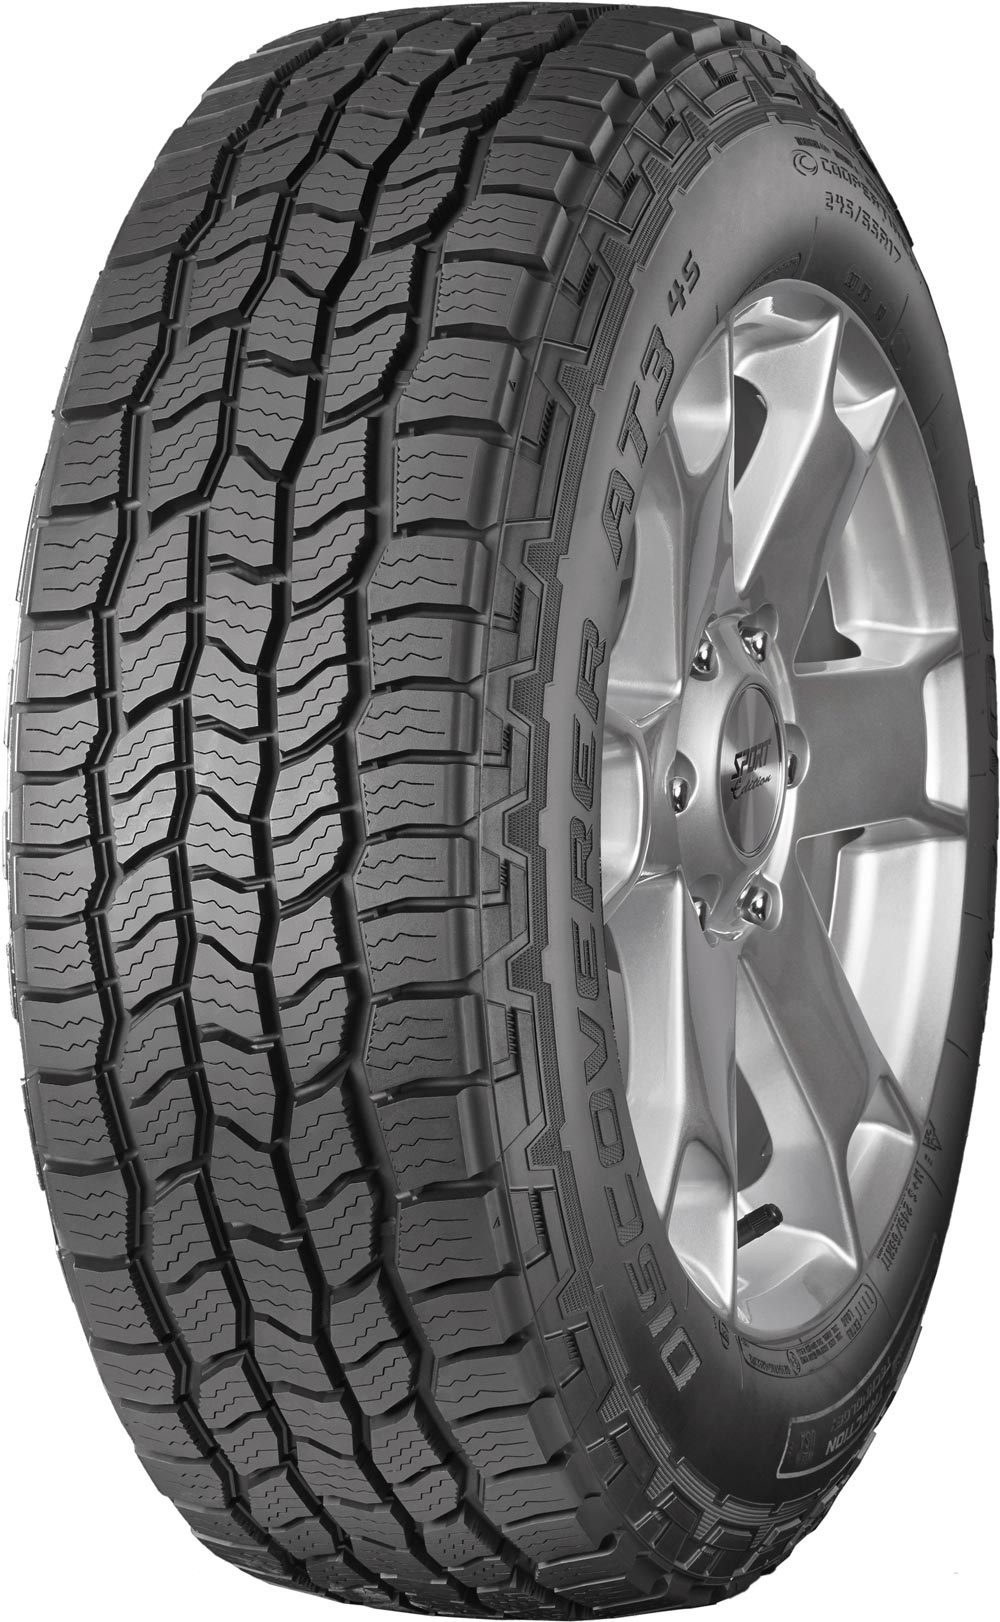 Джипови гуми COOPER DISCOVERER AT3 4S 245/75 R16 111T